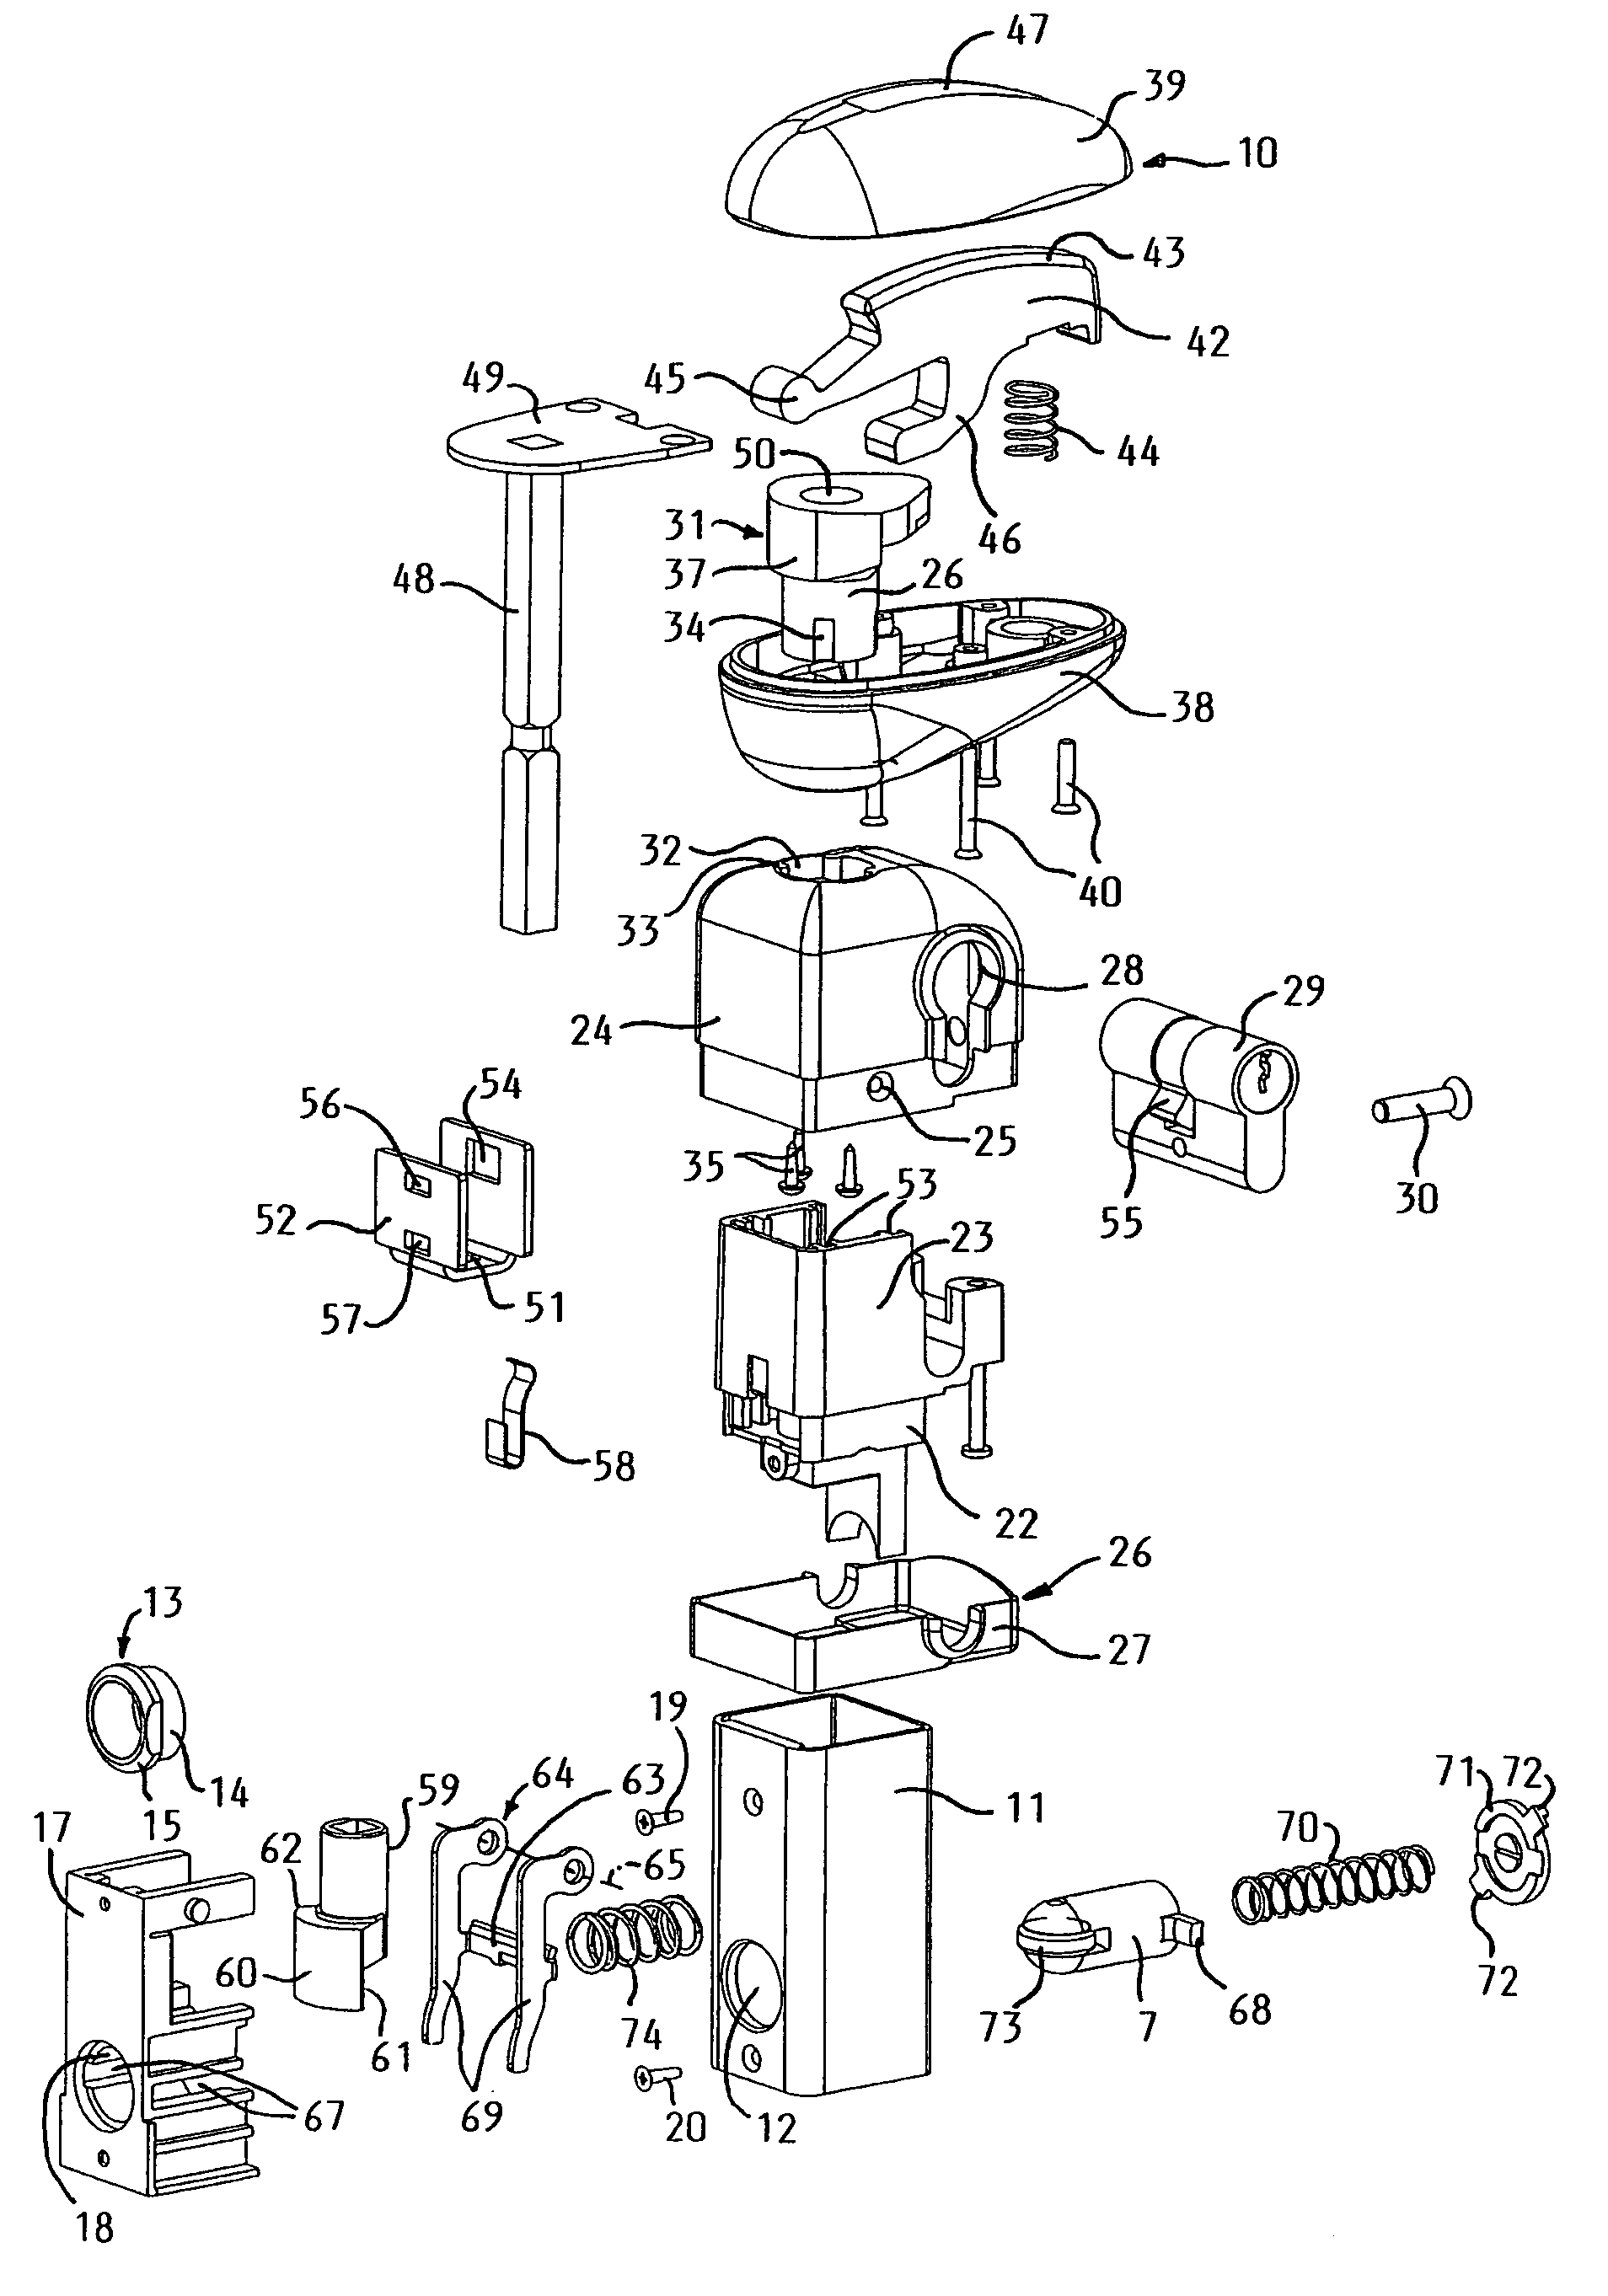 Self-latching device for fastening a hinged closure member